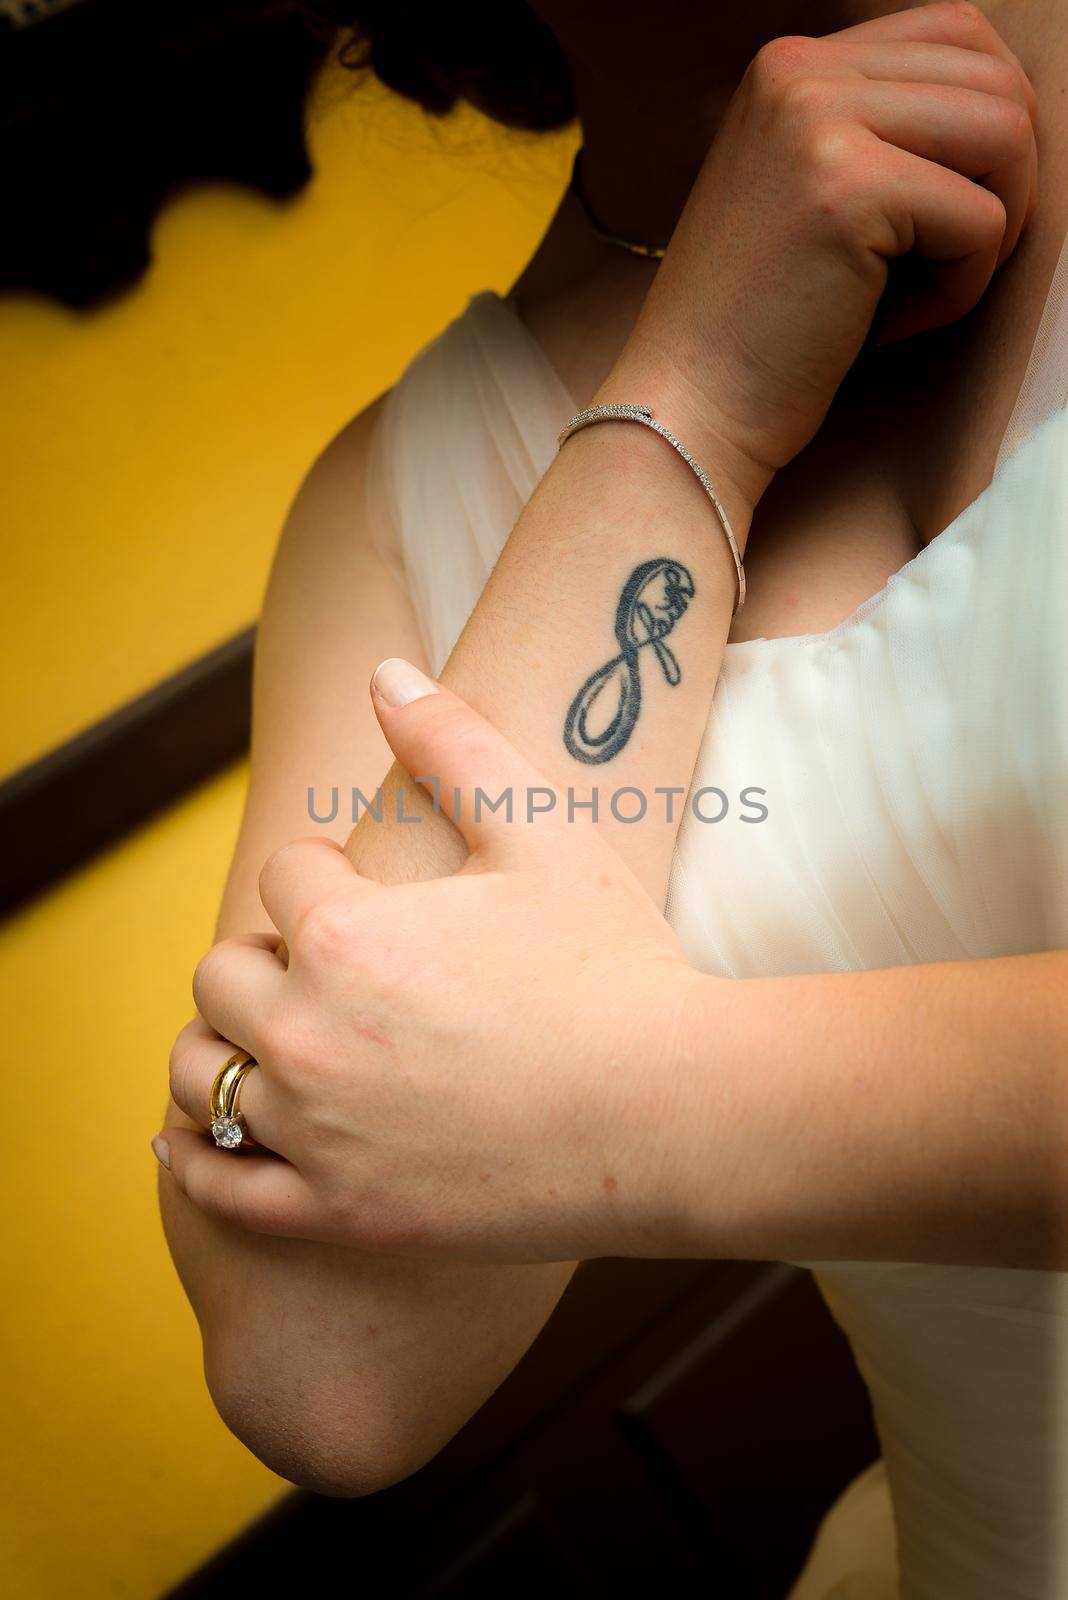 Infınity tattoo on the arm of the bride to be close up view